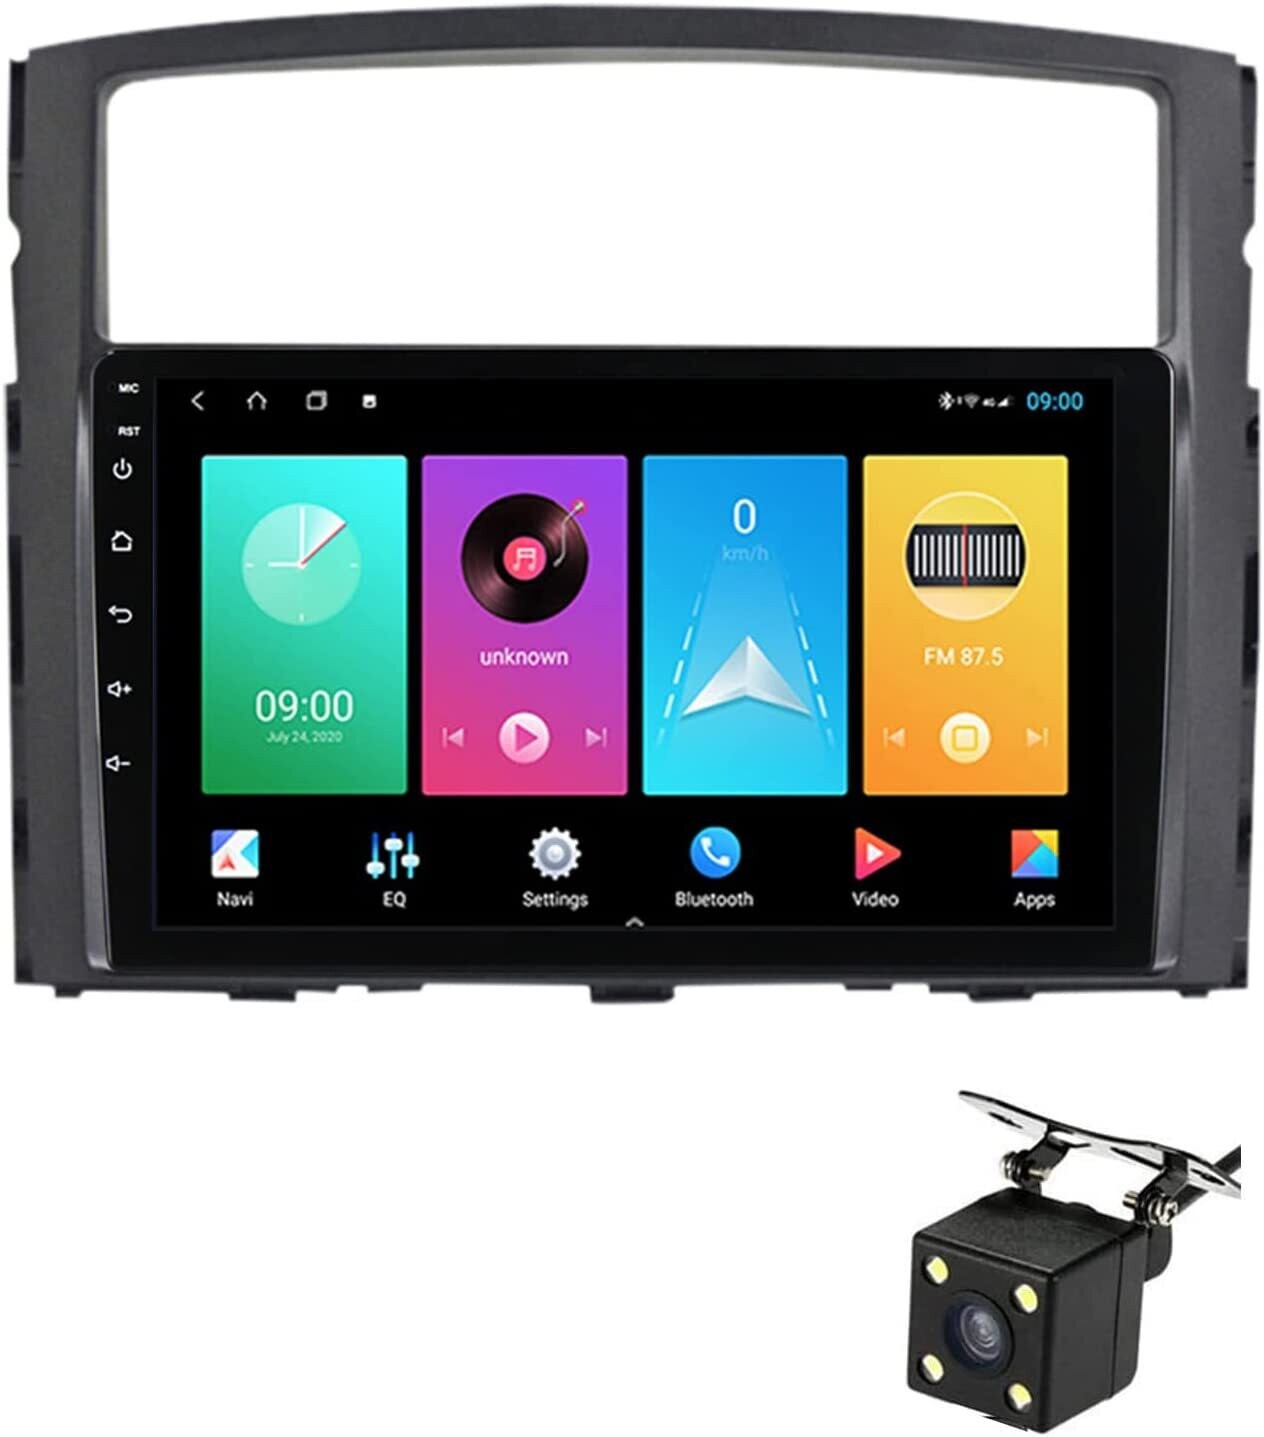 Mitsubishi Pajero Android touch screen smart custom car stereo radio 9 inch, with bluetooth, GPS, Android auto and Apple Carplay 2gb 32gb. 2006, 2007, 2008, 2009, 2010, 2011, 2012, 2013, 2014